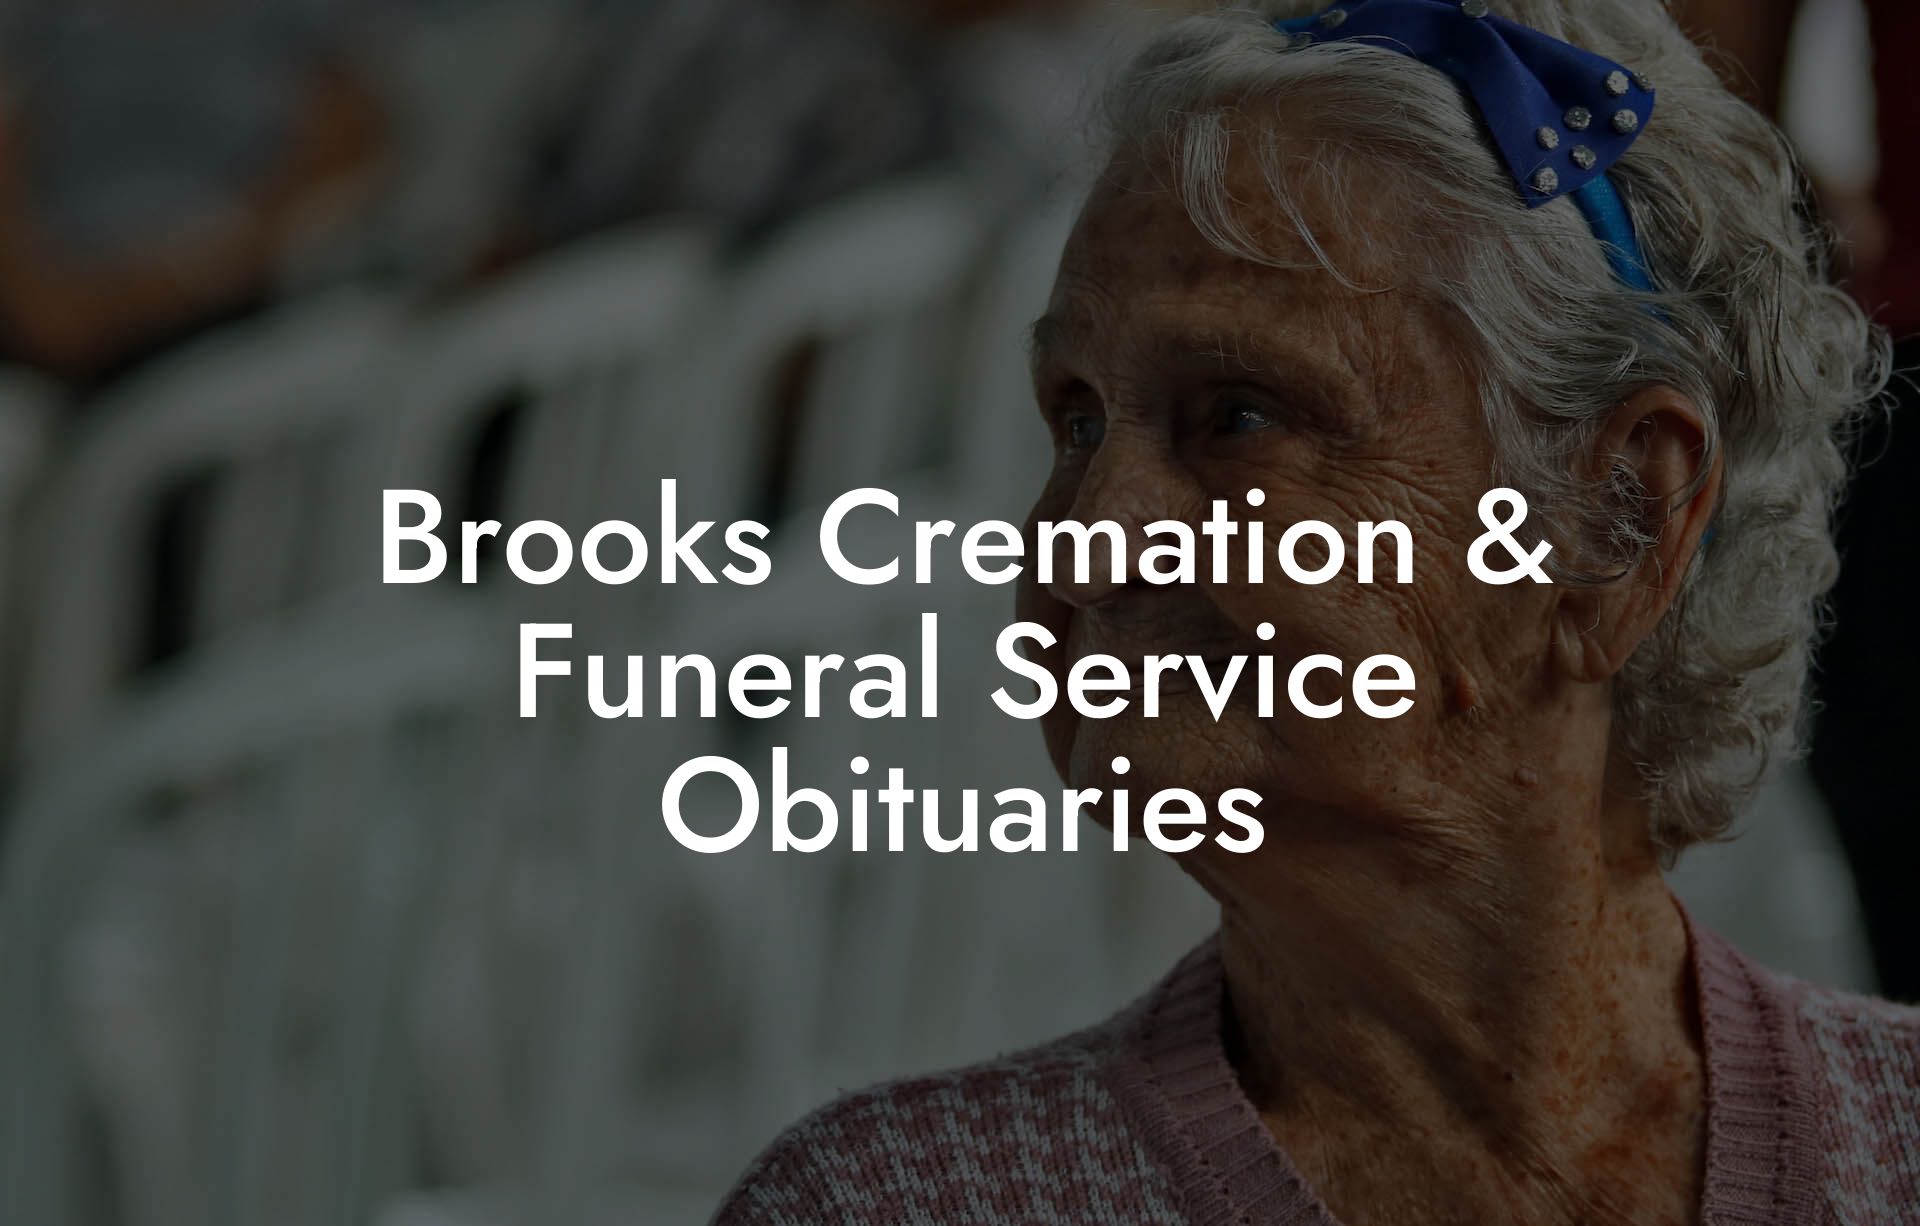 Brooks Cremation & Funeral Service Obituaries